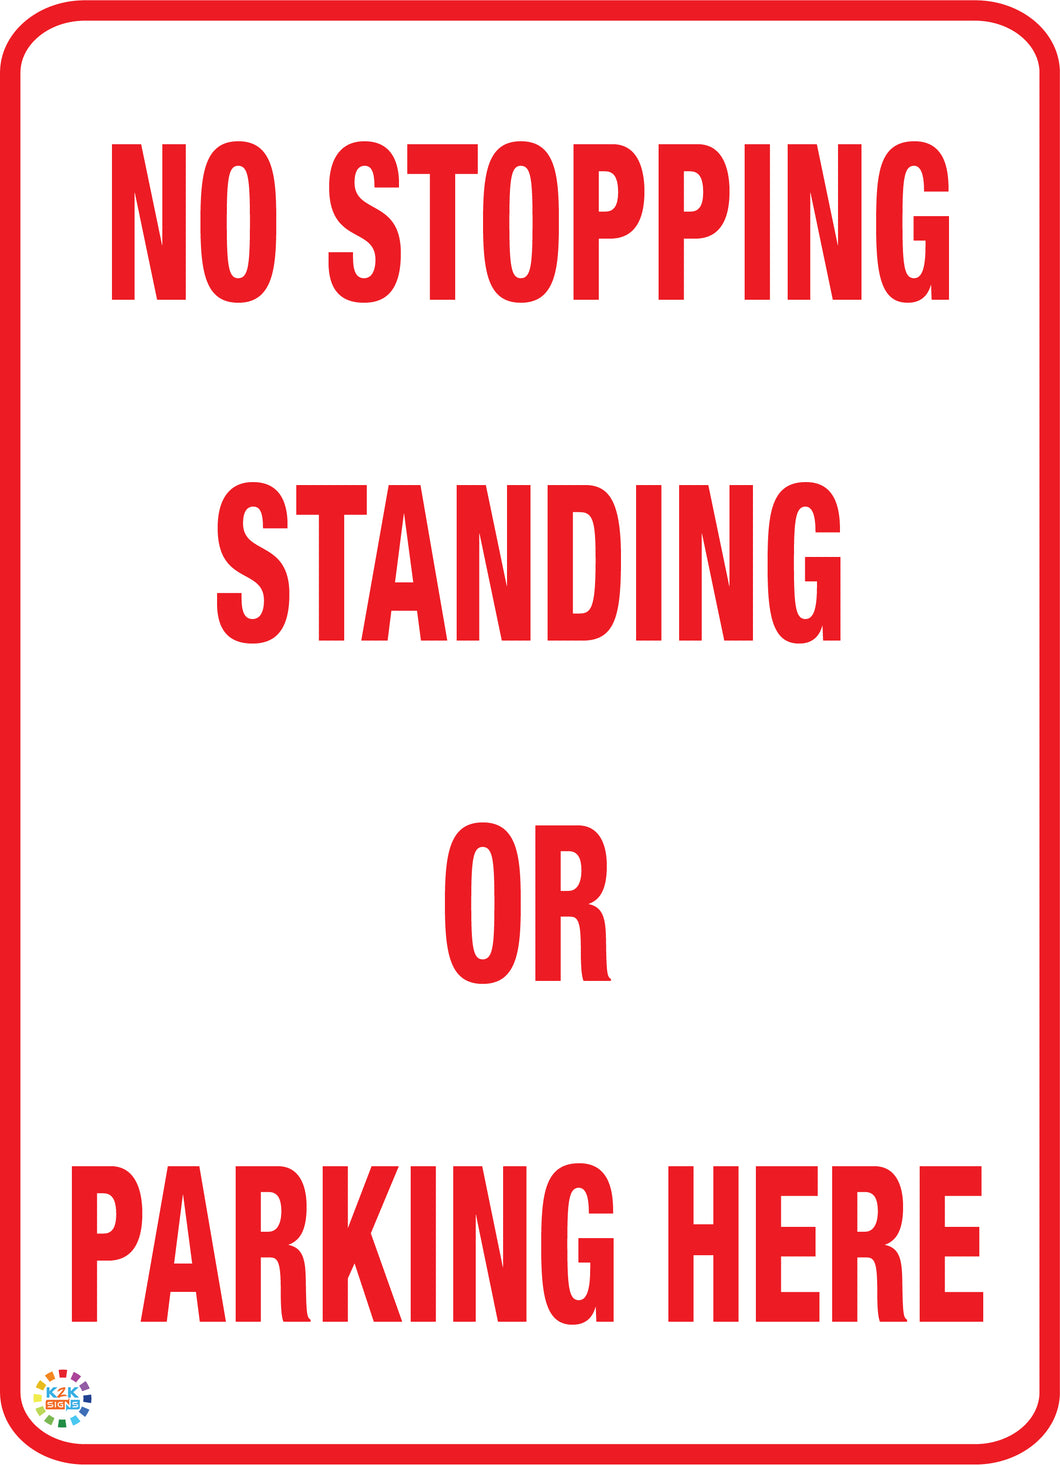 No Stopping Standing or Parking Here